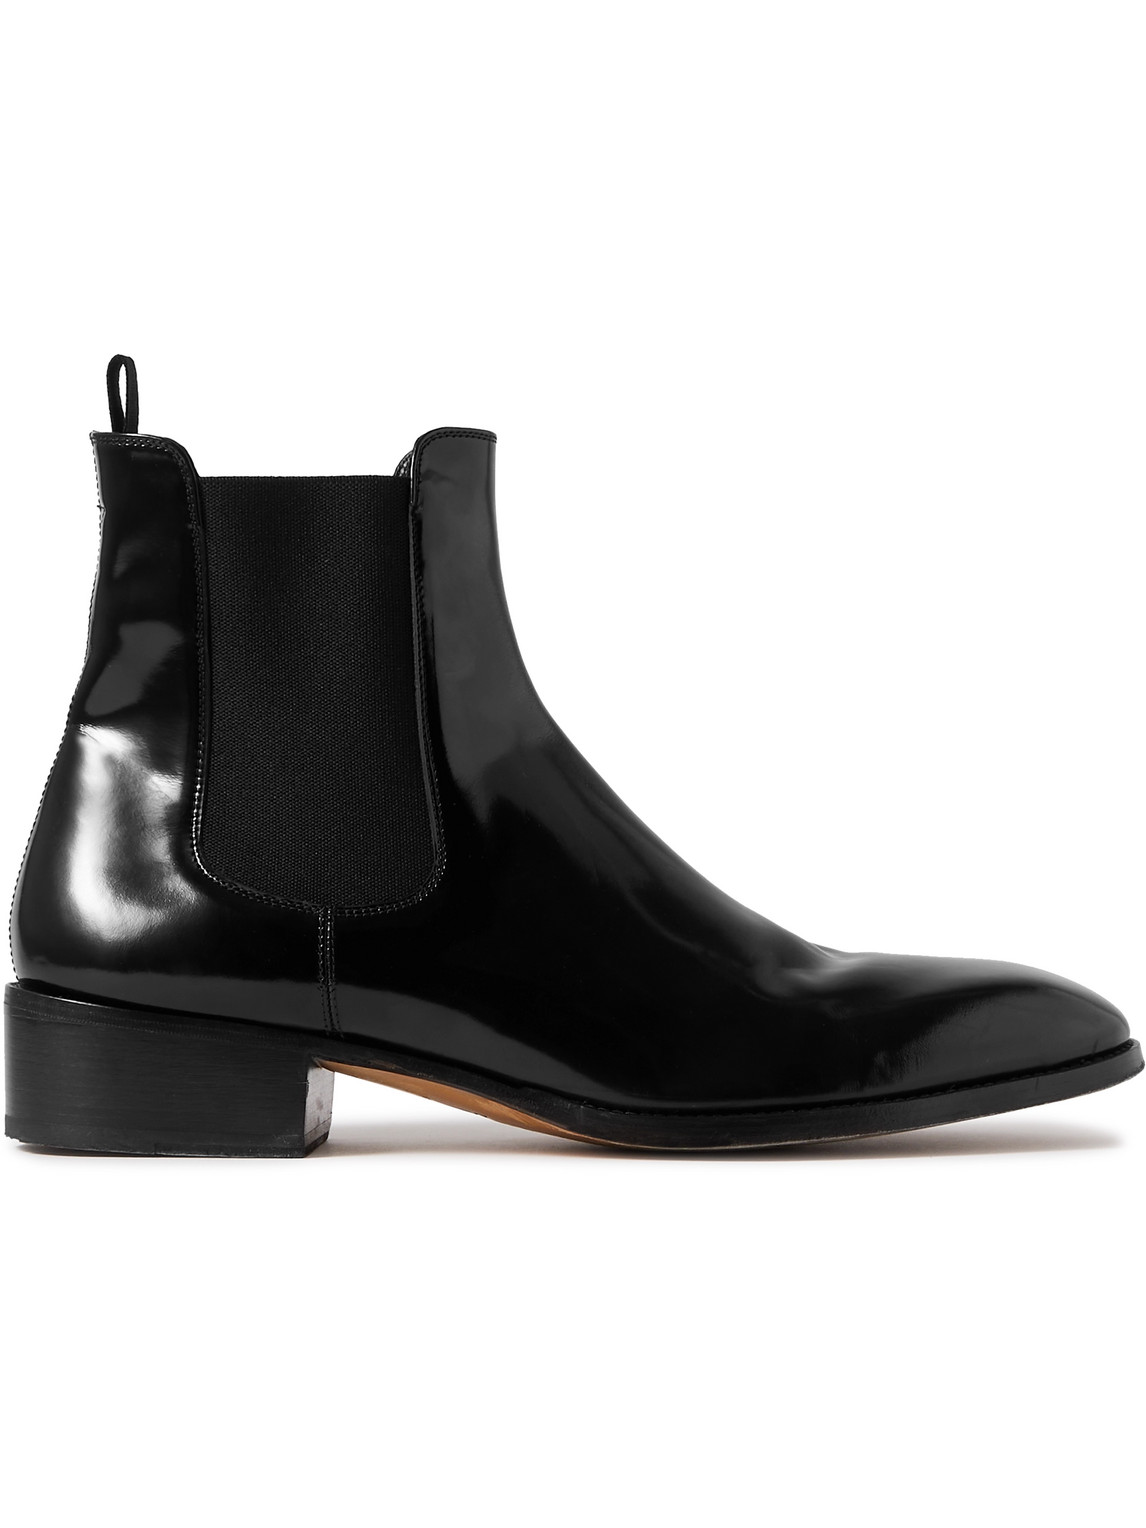 TOM FORD ALEC PATENT-LEATHER CHELSEA BOOTS